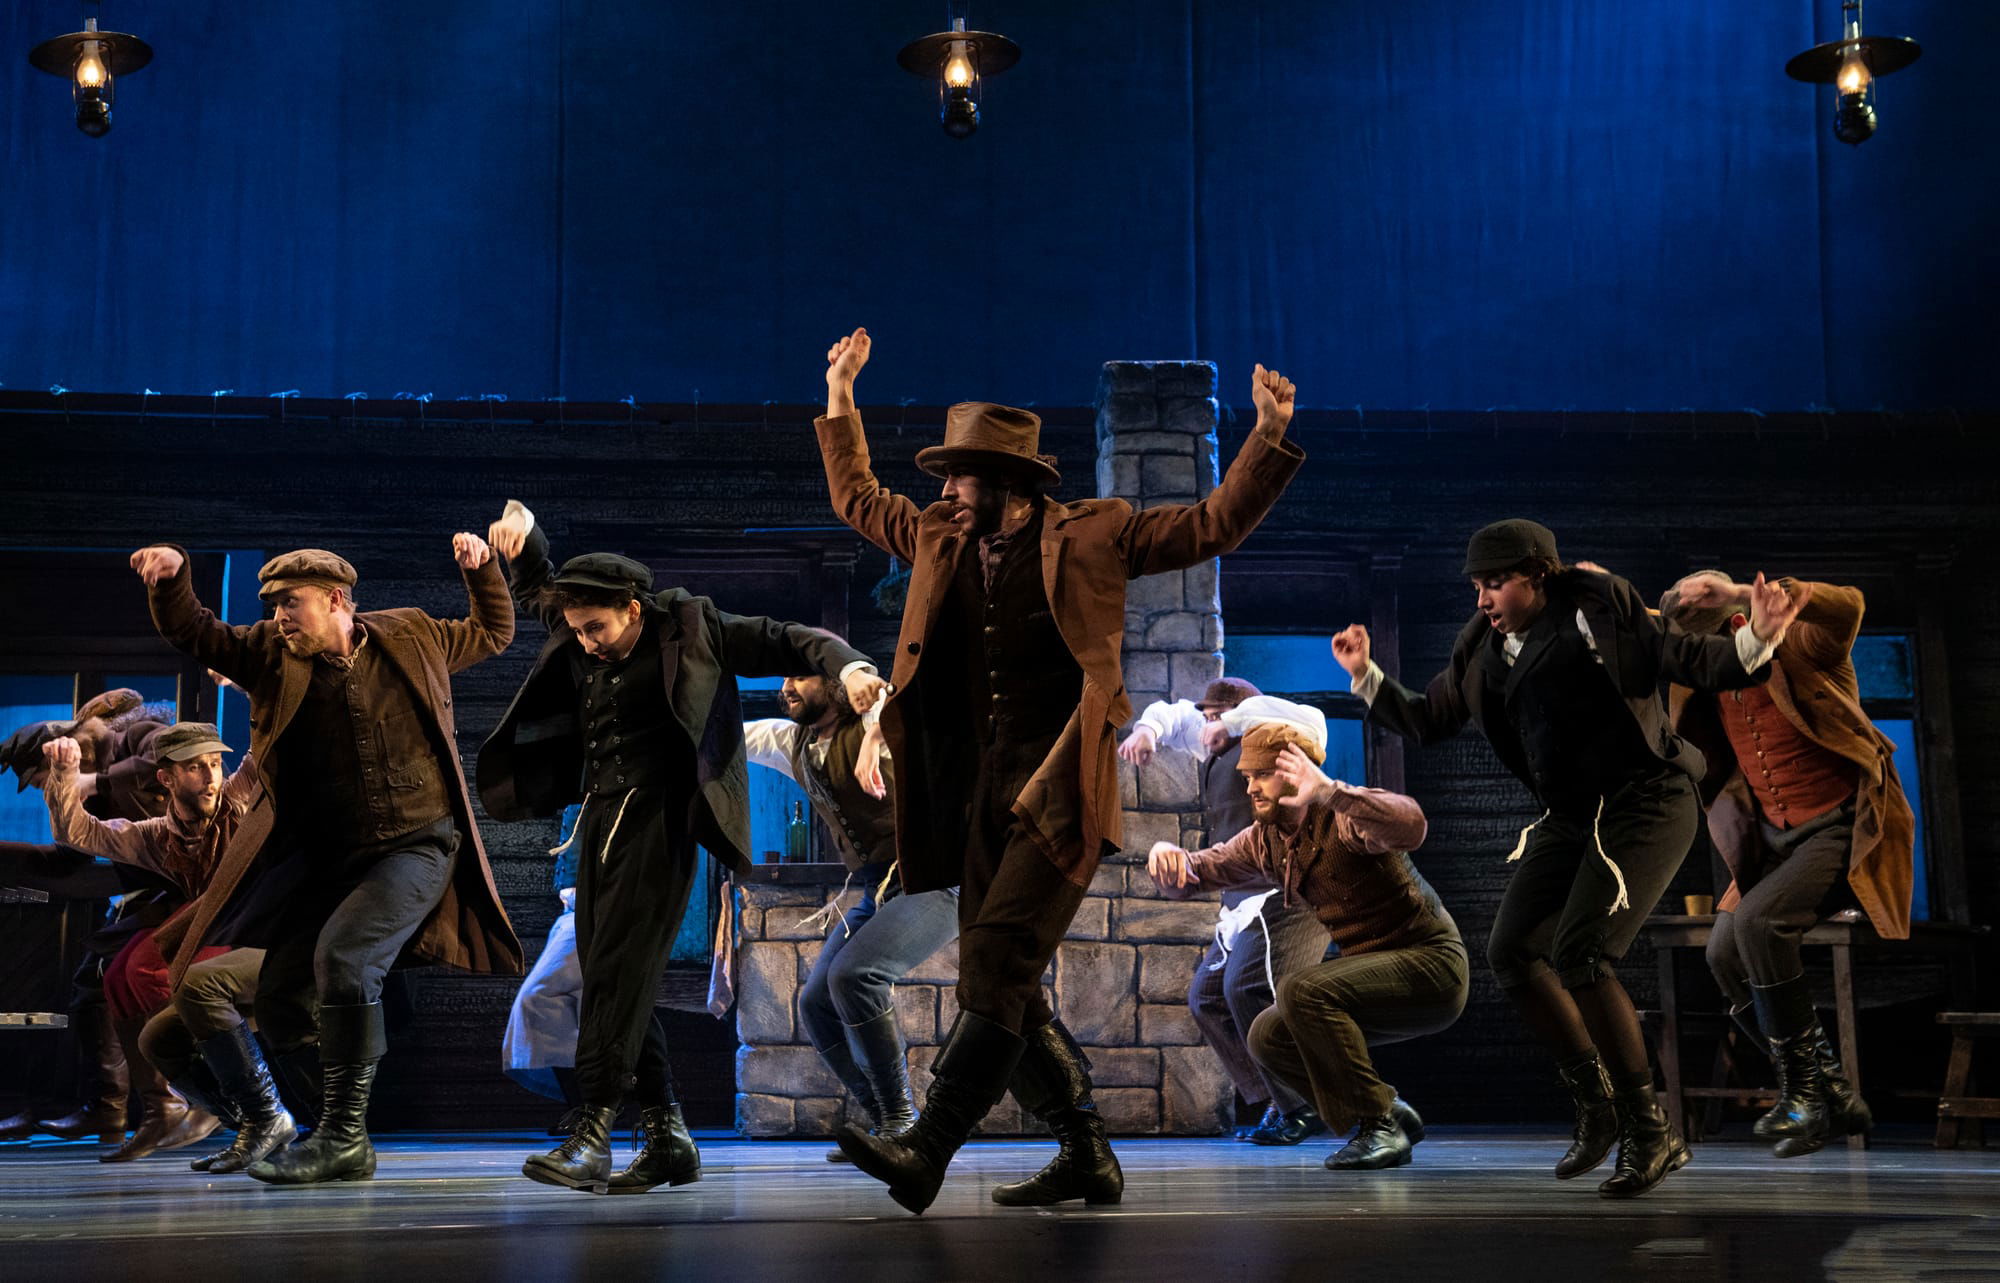 METRMAG Spotlight On: "Fiddler on the Roof" Interview with Ali Arian Molaei (“The Fiddler”)